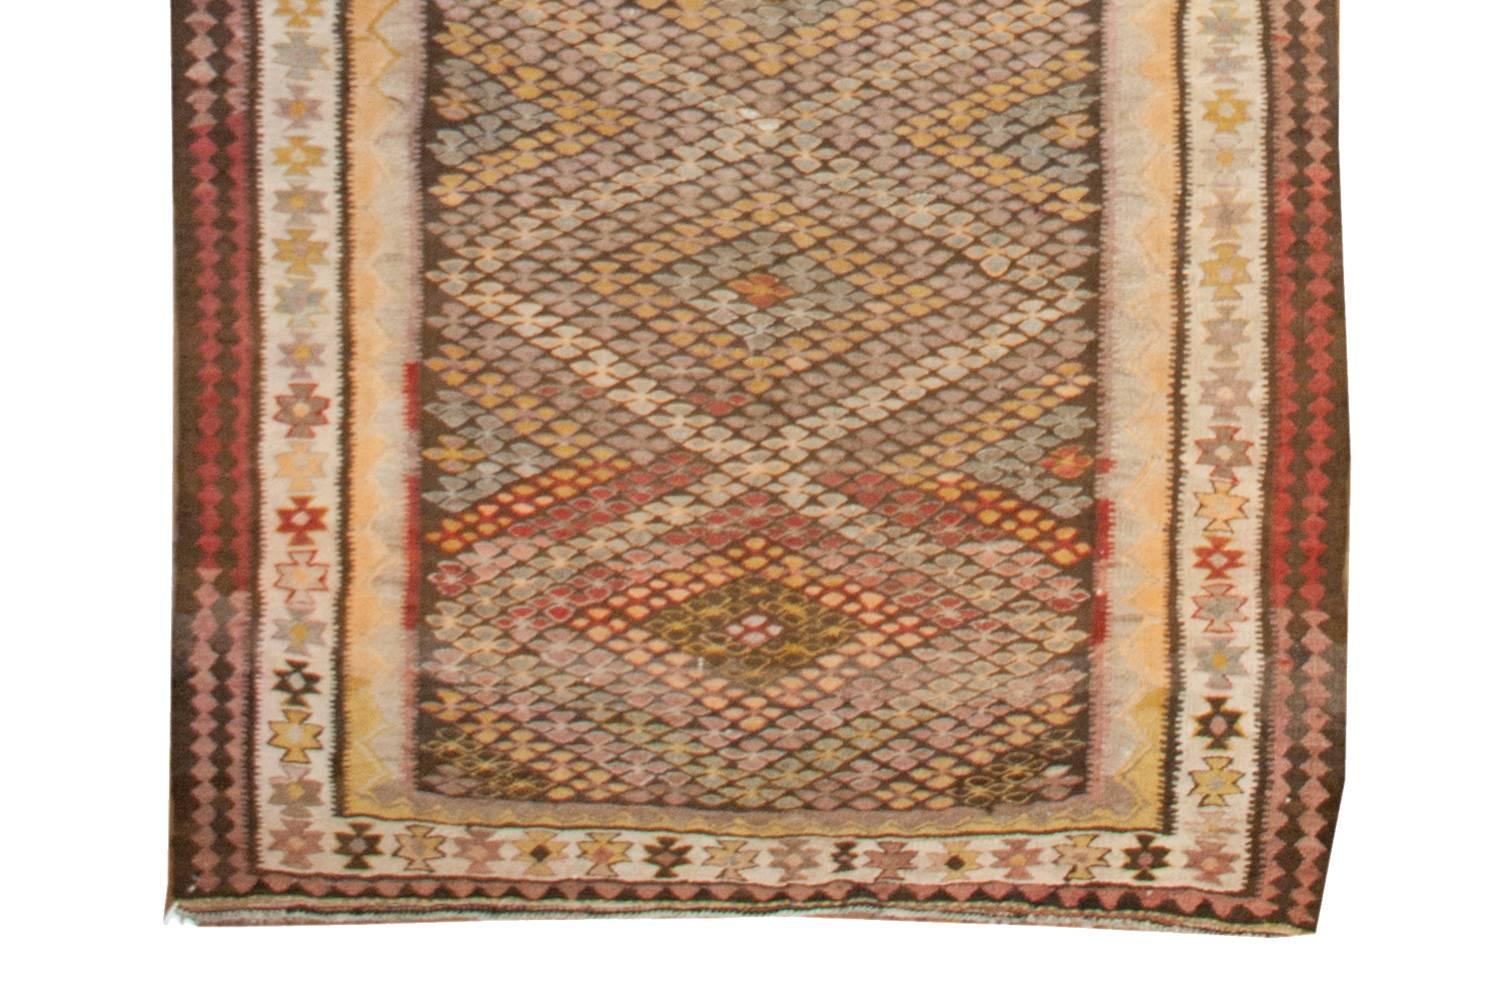 An exquisite Qazvin Kilim runner with an incredible and unique multicolored four-lobed floral pattern creating a diamond pattern across the field. The border is composed of three distinct patterns, with a central white stripe covered with